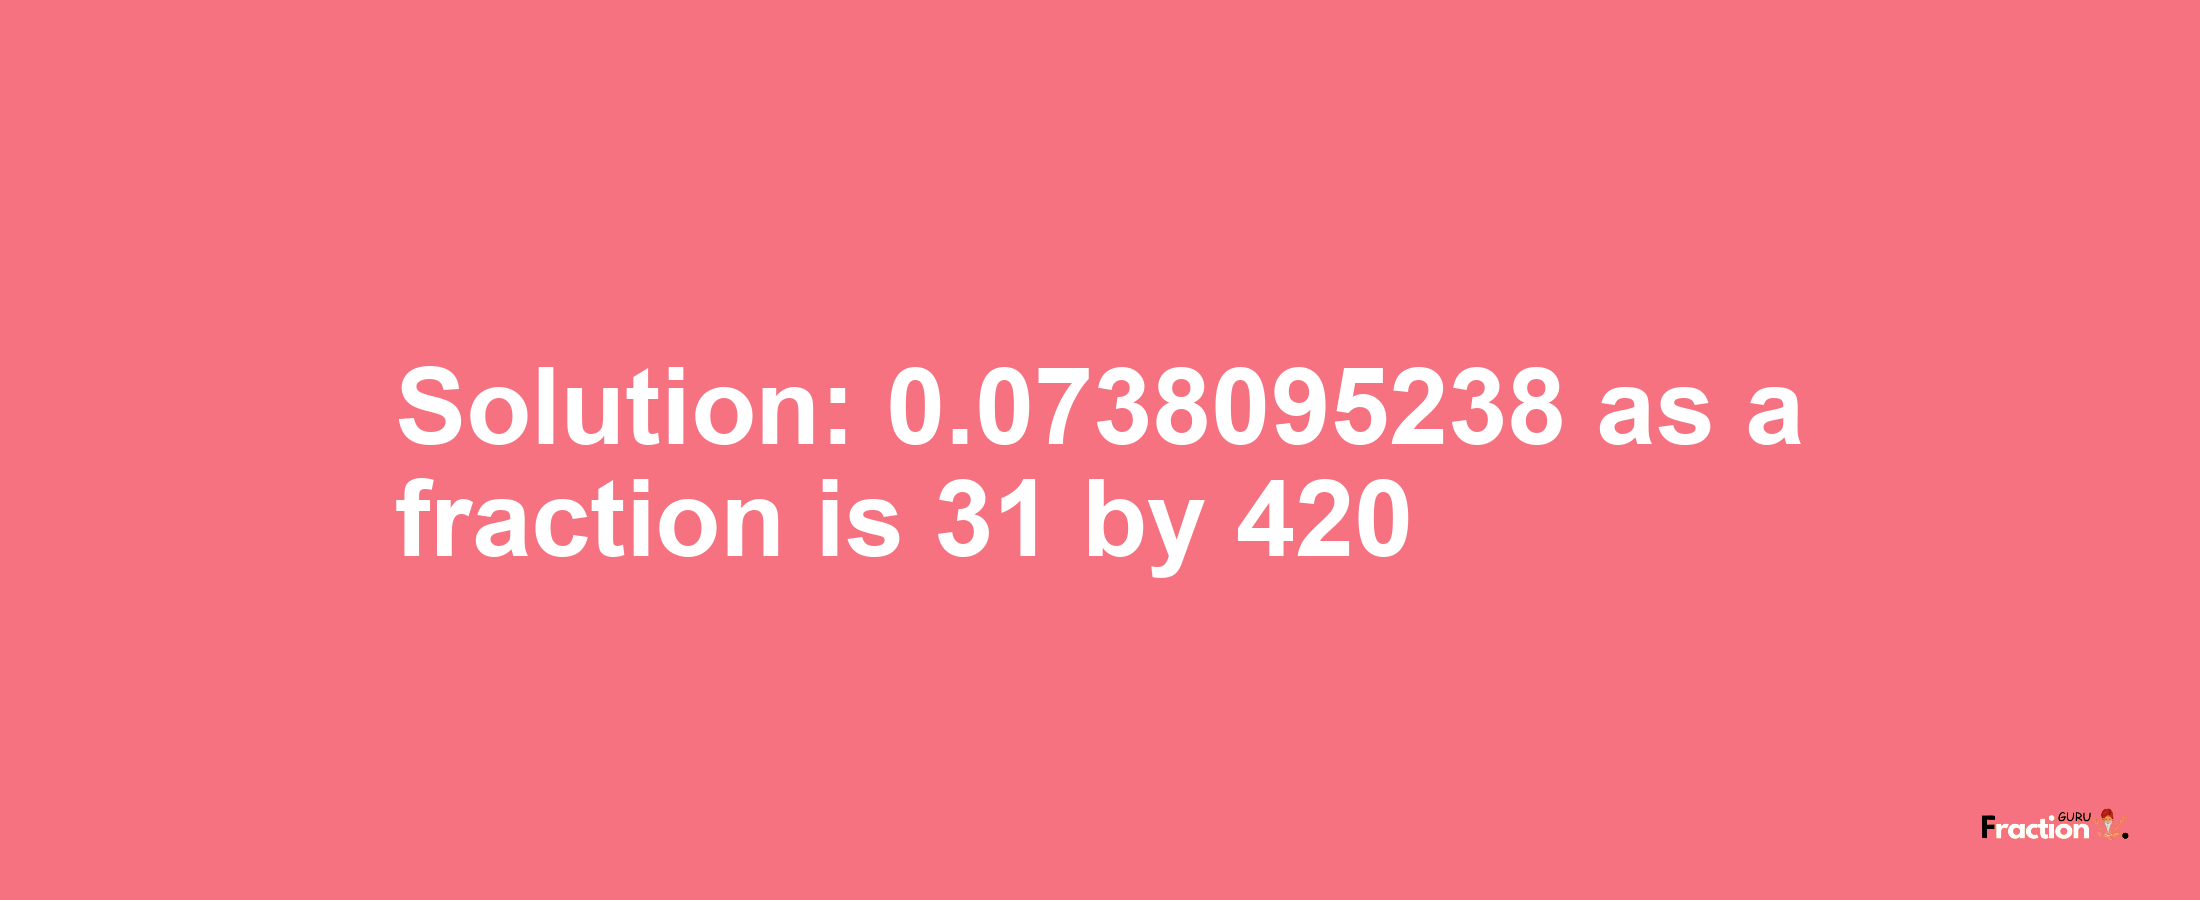 Solution:0.0738095238 as a fraction is 31/420